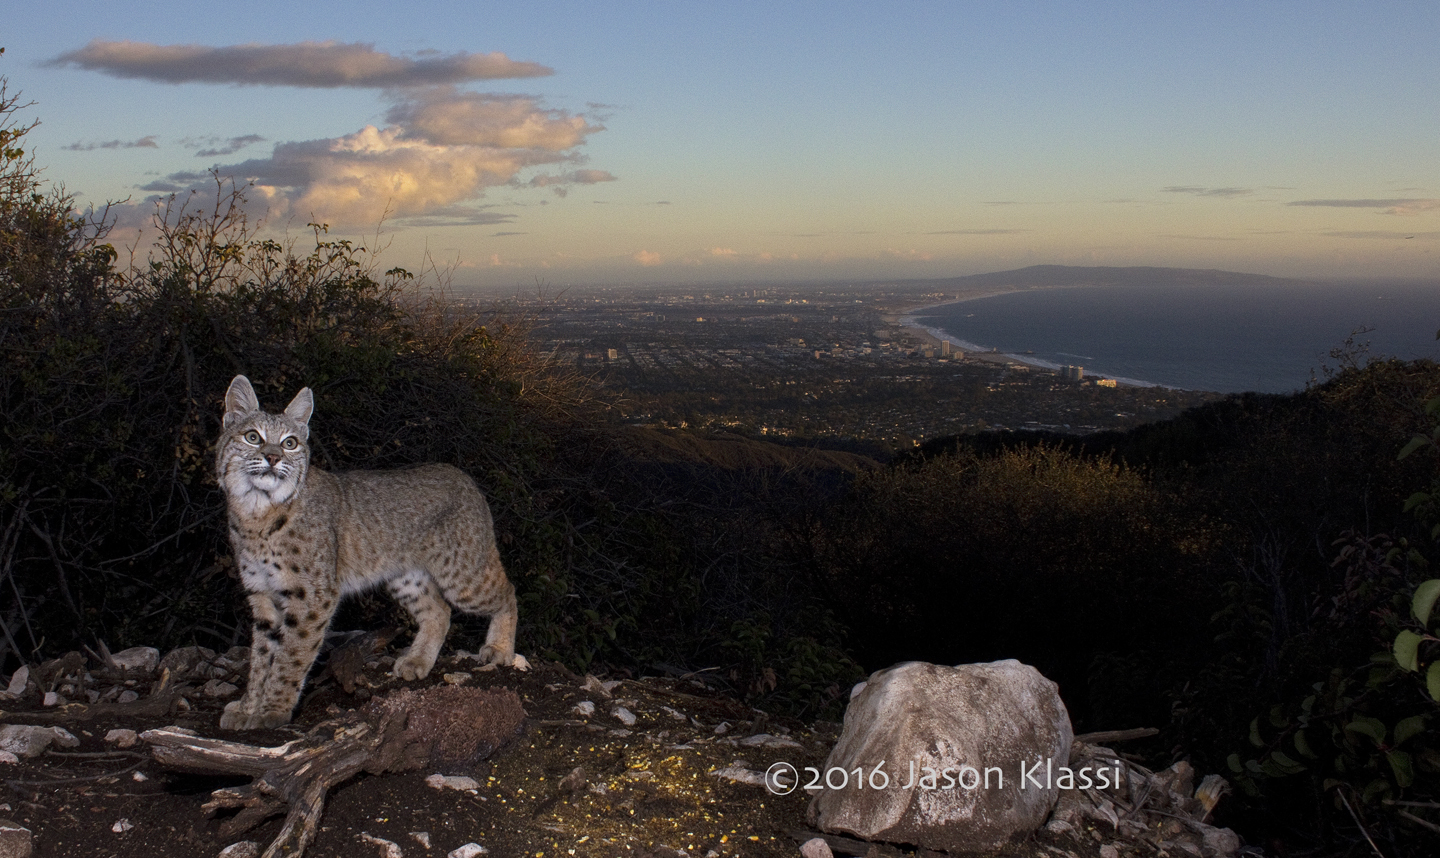 A local bobcat visits my camera trap on the edge of civilization high up in the Santa Monica Mountains. © Jason Klassi